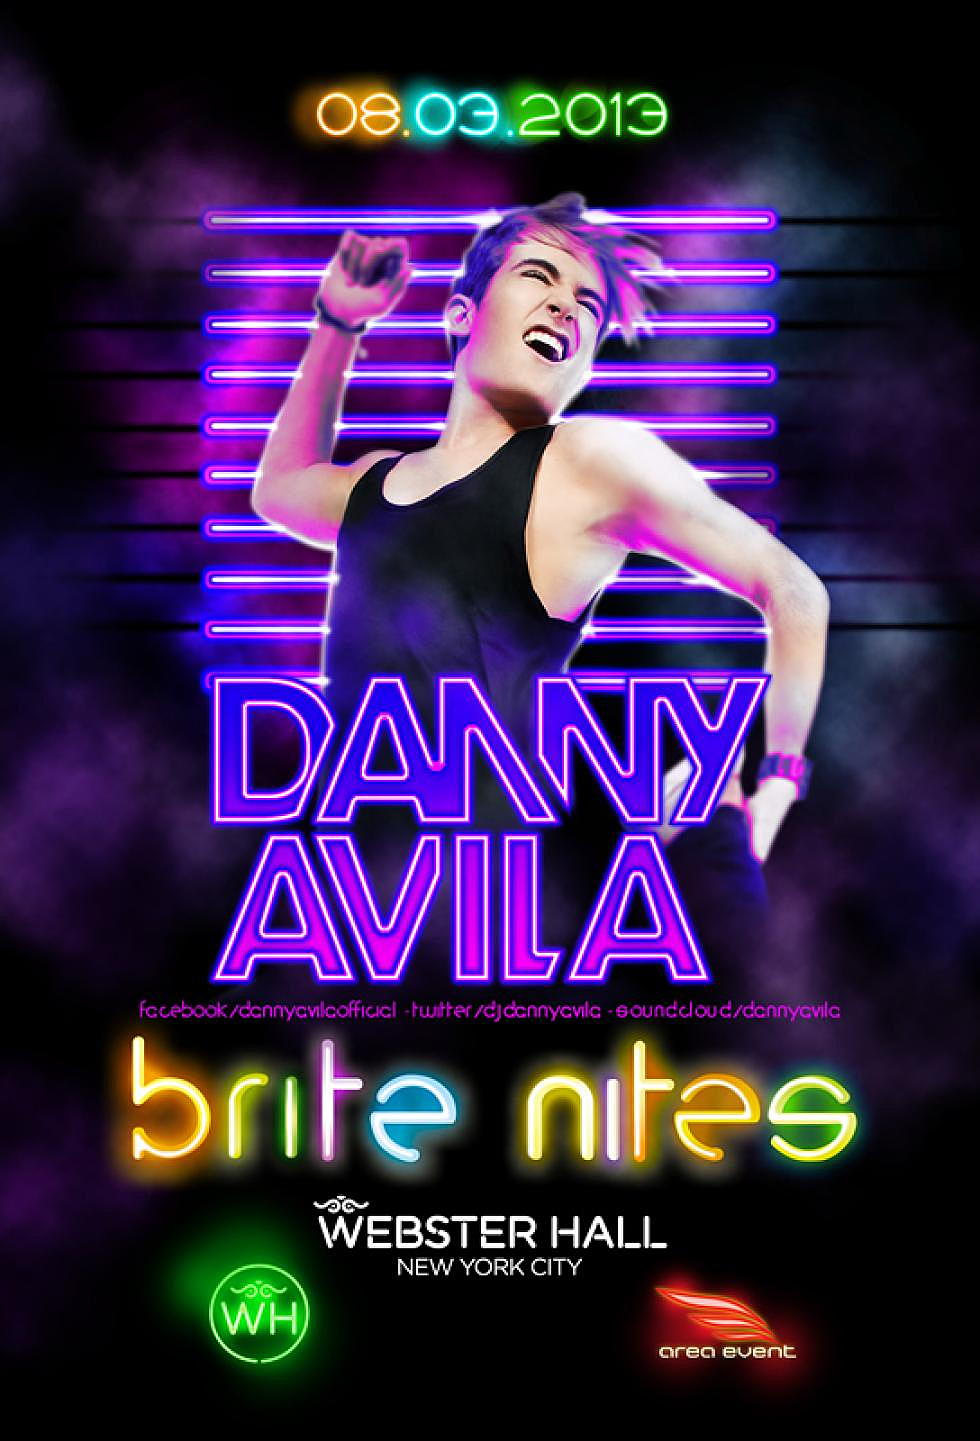 CONTEST: Win a meet and greet with Danny Avila &#038; 2 VIP tickets to his show @ Webster Hall 8/3!